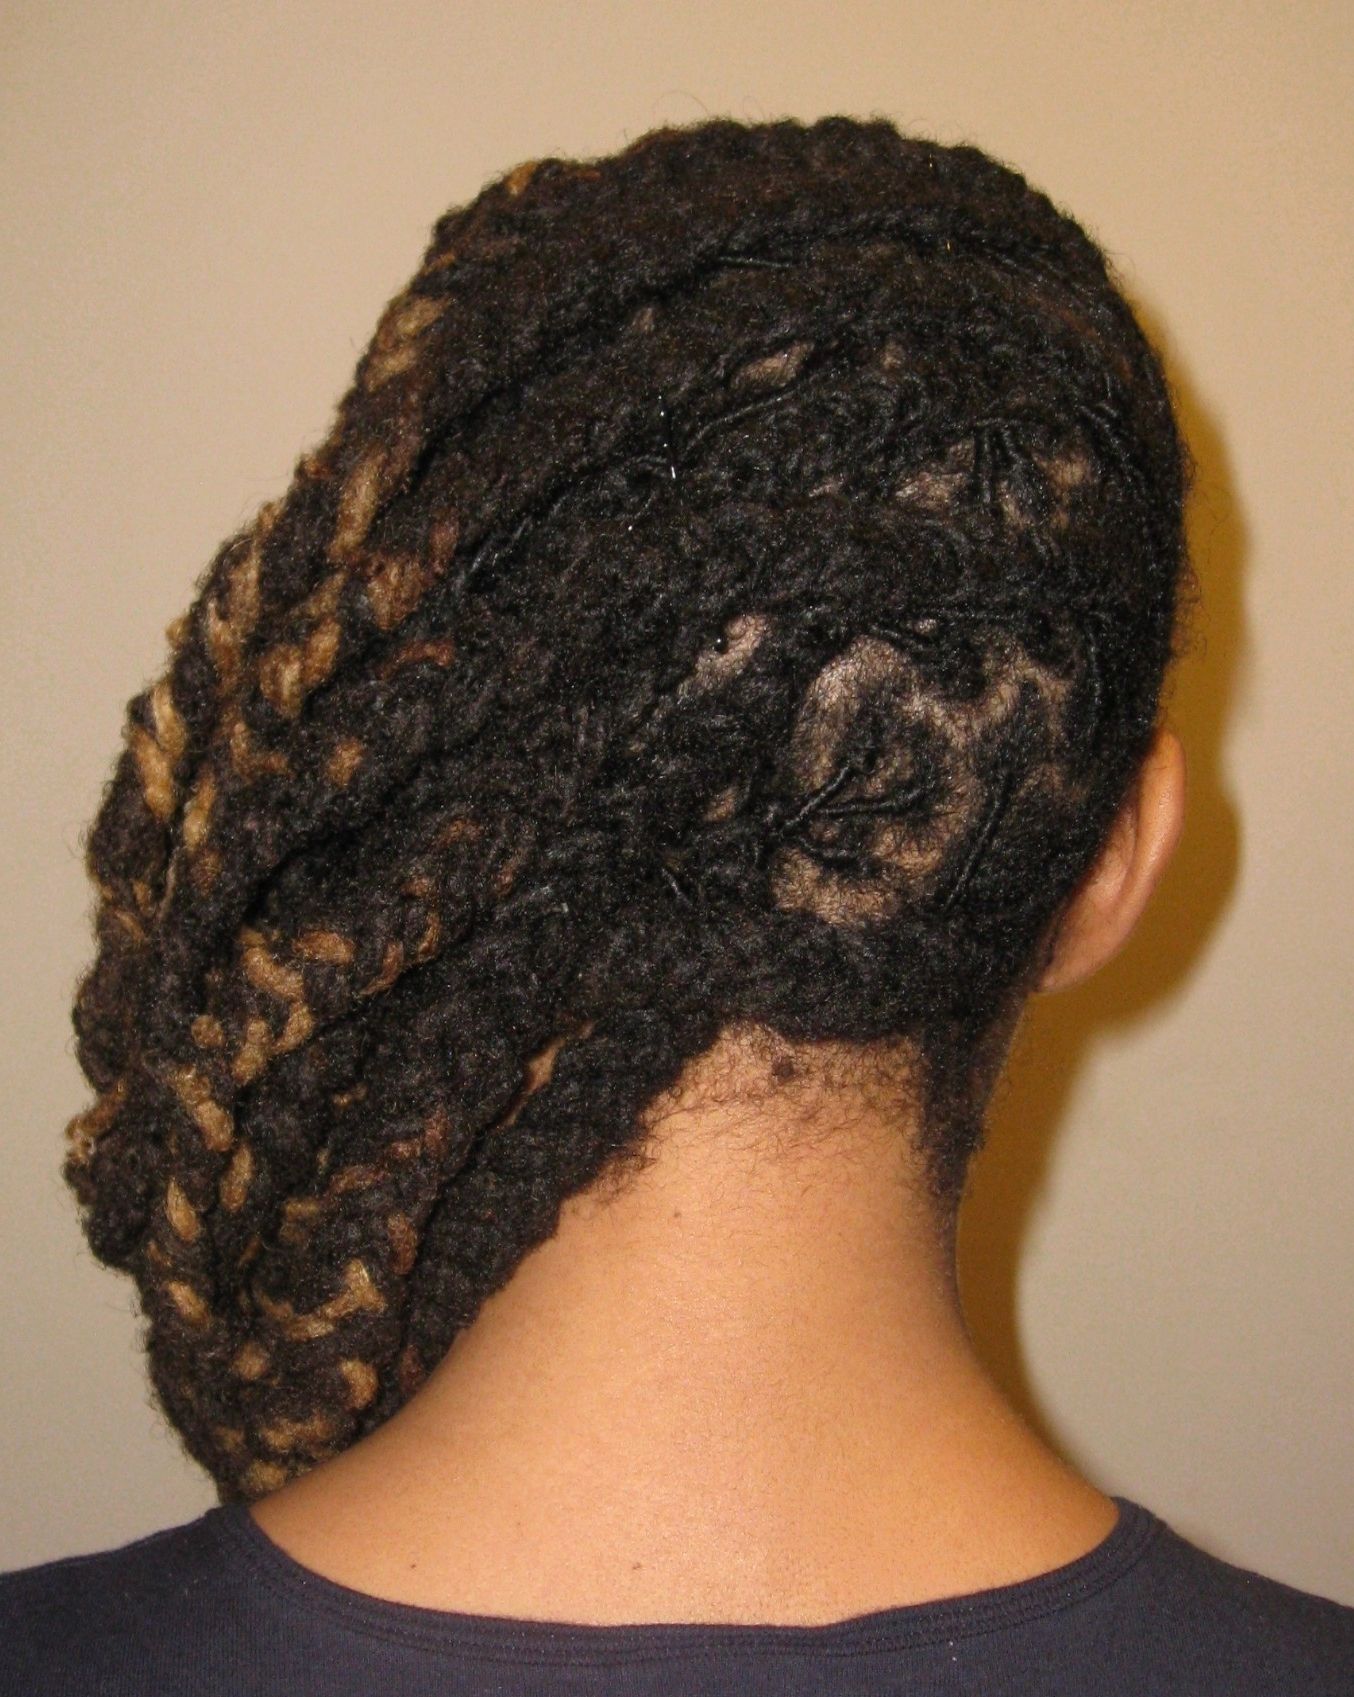 Preferred Braided Dreadlock Hairstyles For Women For Braided Dreadlocks Hairstyles For Women 50 Fresh Braided Dreads (View 8 of 15)